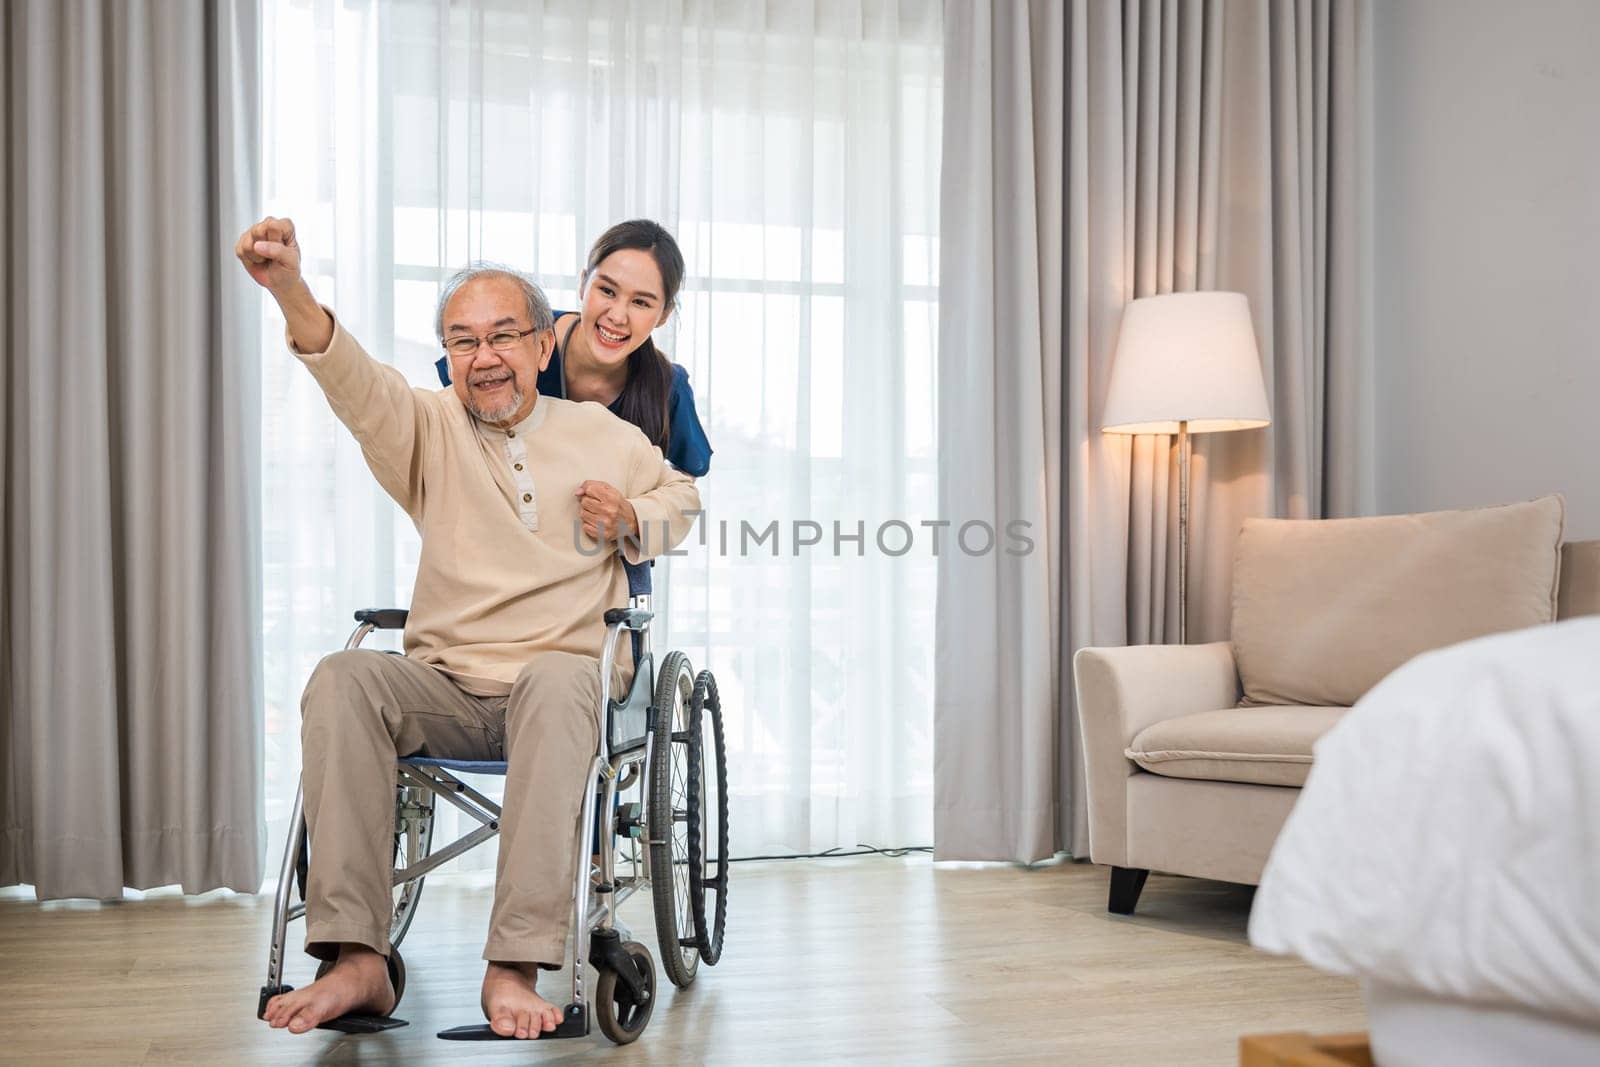 Asian senior retired old man sitting on wheelchair having fun with young woman nurse, Happy curator person doctor pushing and running elderly patient freedom raising arm, sanatorium